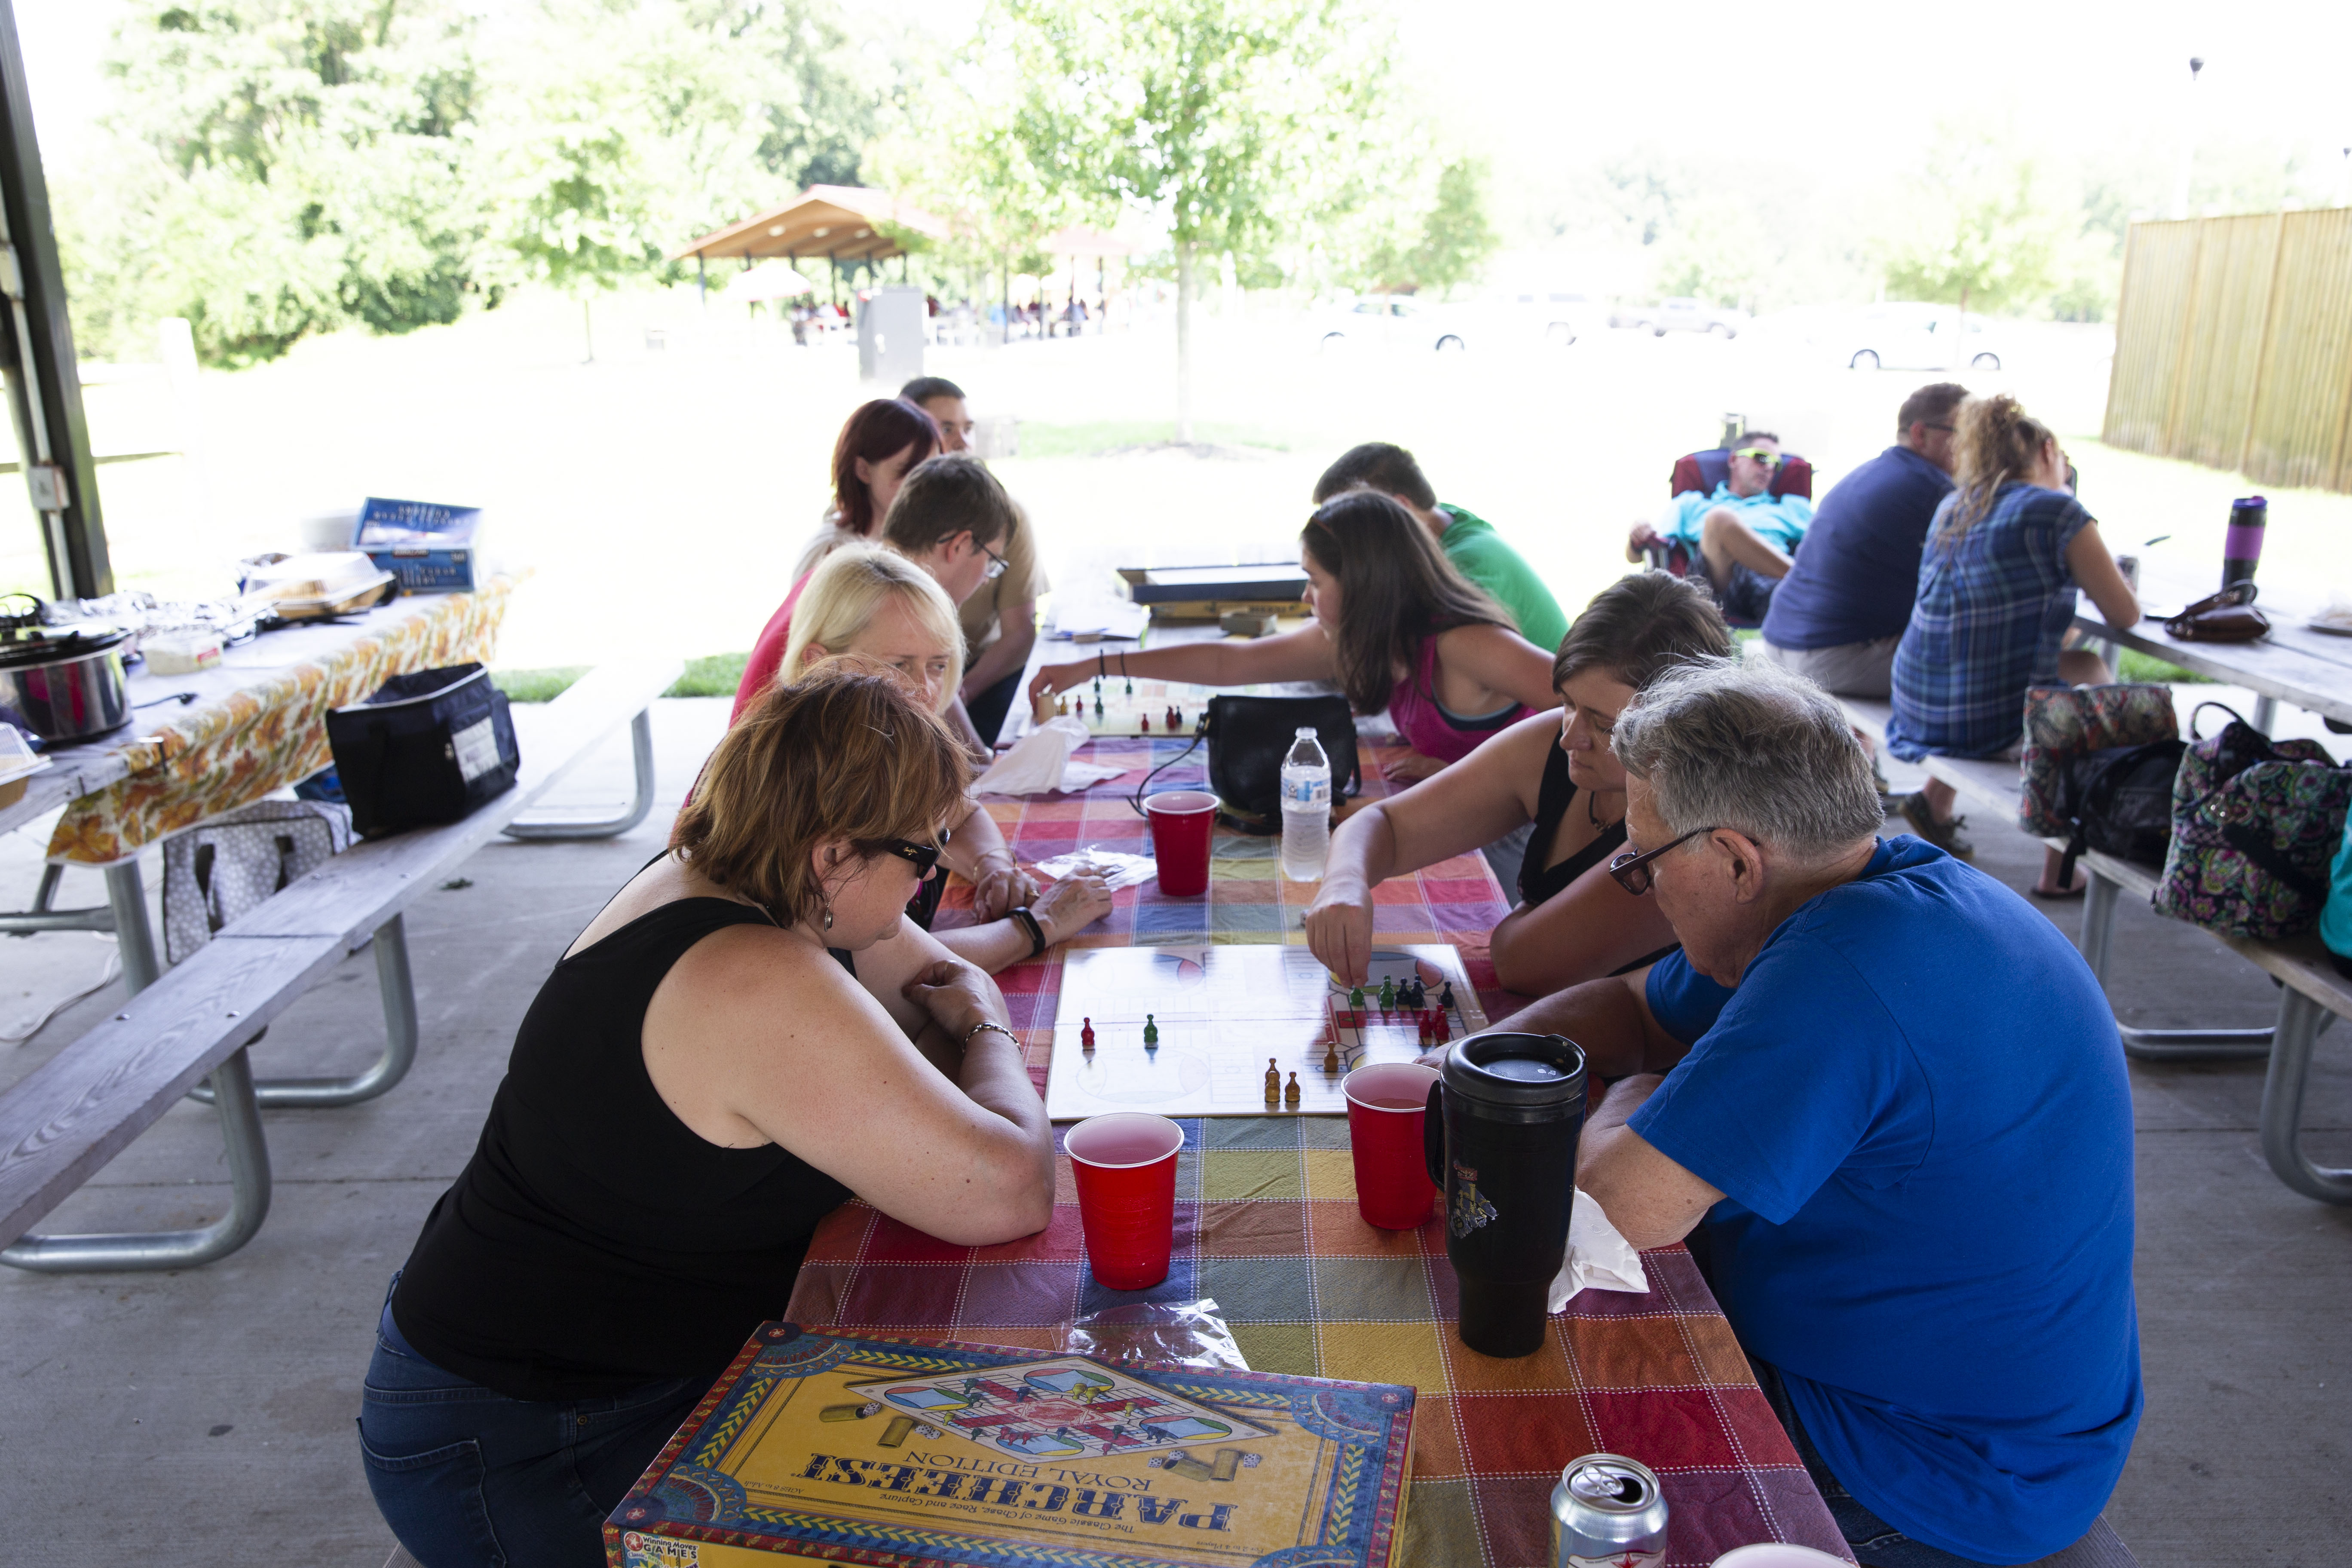 Family members playing table games at a family reunion